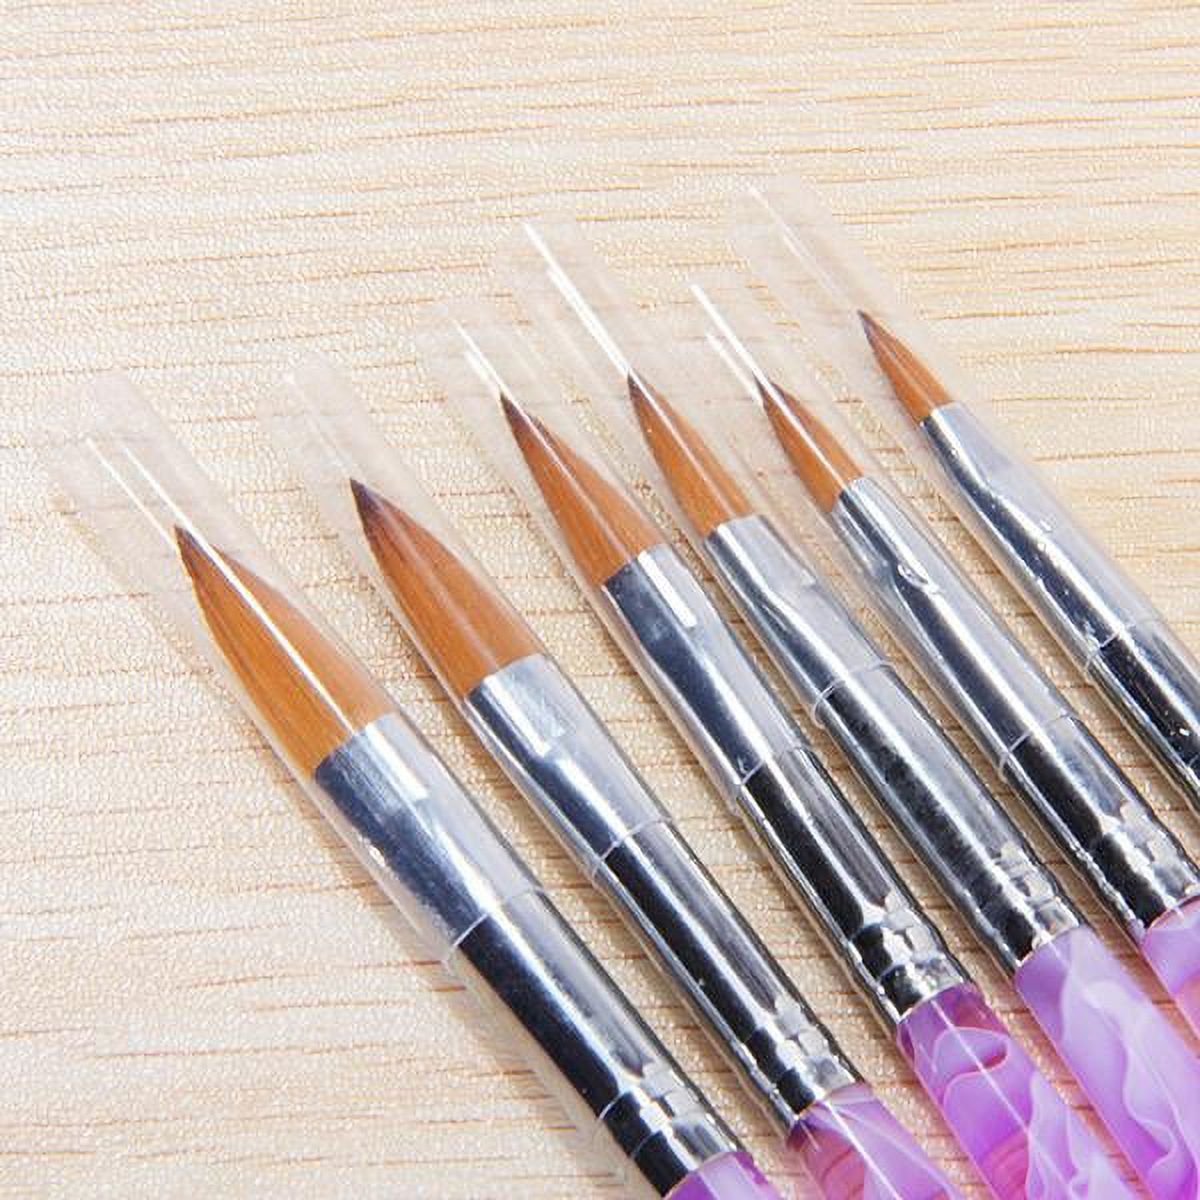 Set Of S Assorted Sizes Acrylic Nail Art Brush Manicure Equipment Beauty Supplies Cosmetic Tool Light Lavender - image 2 of 7